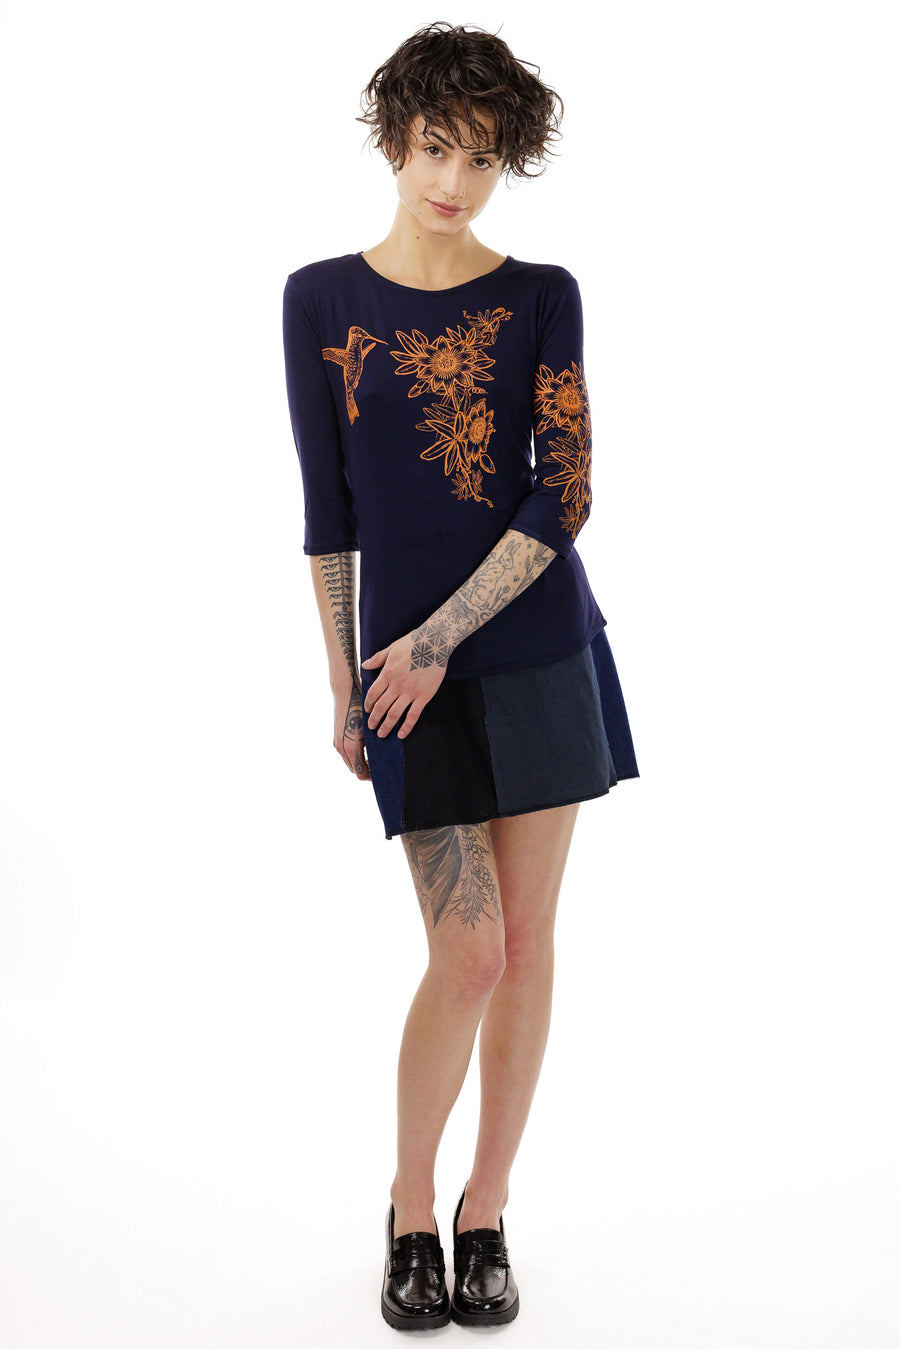 Passion flower with New Hummingbird 3/4 Sleeve Top